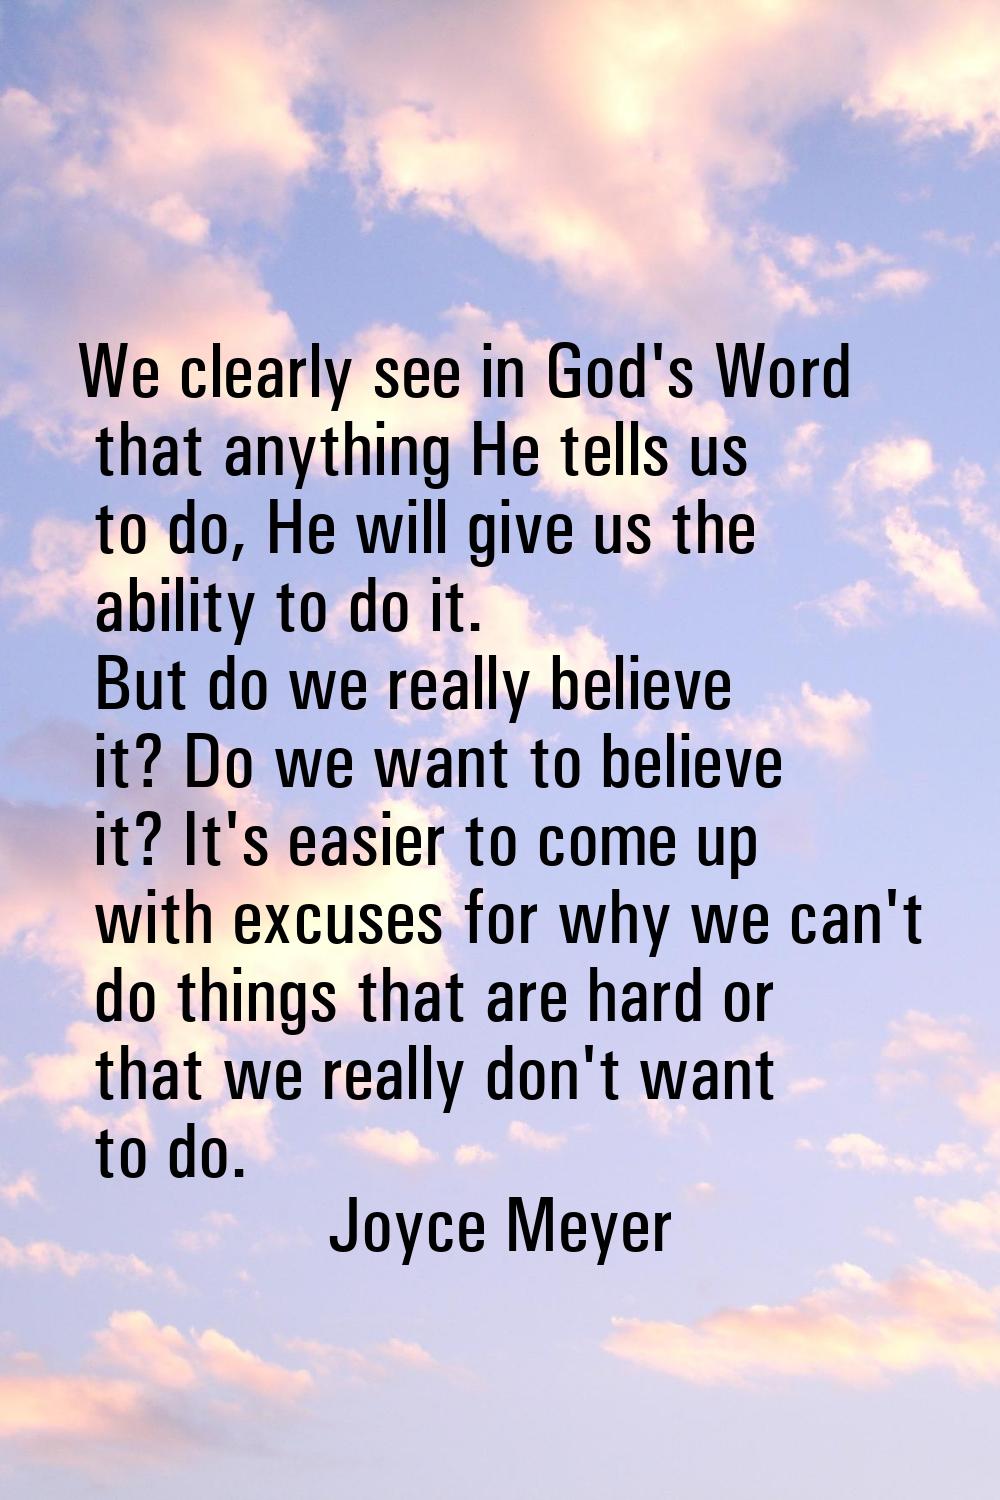 We clearly see in God's Word that anything He tells us to do, He will give us the ability to do it.